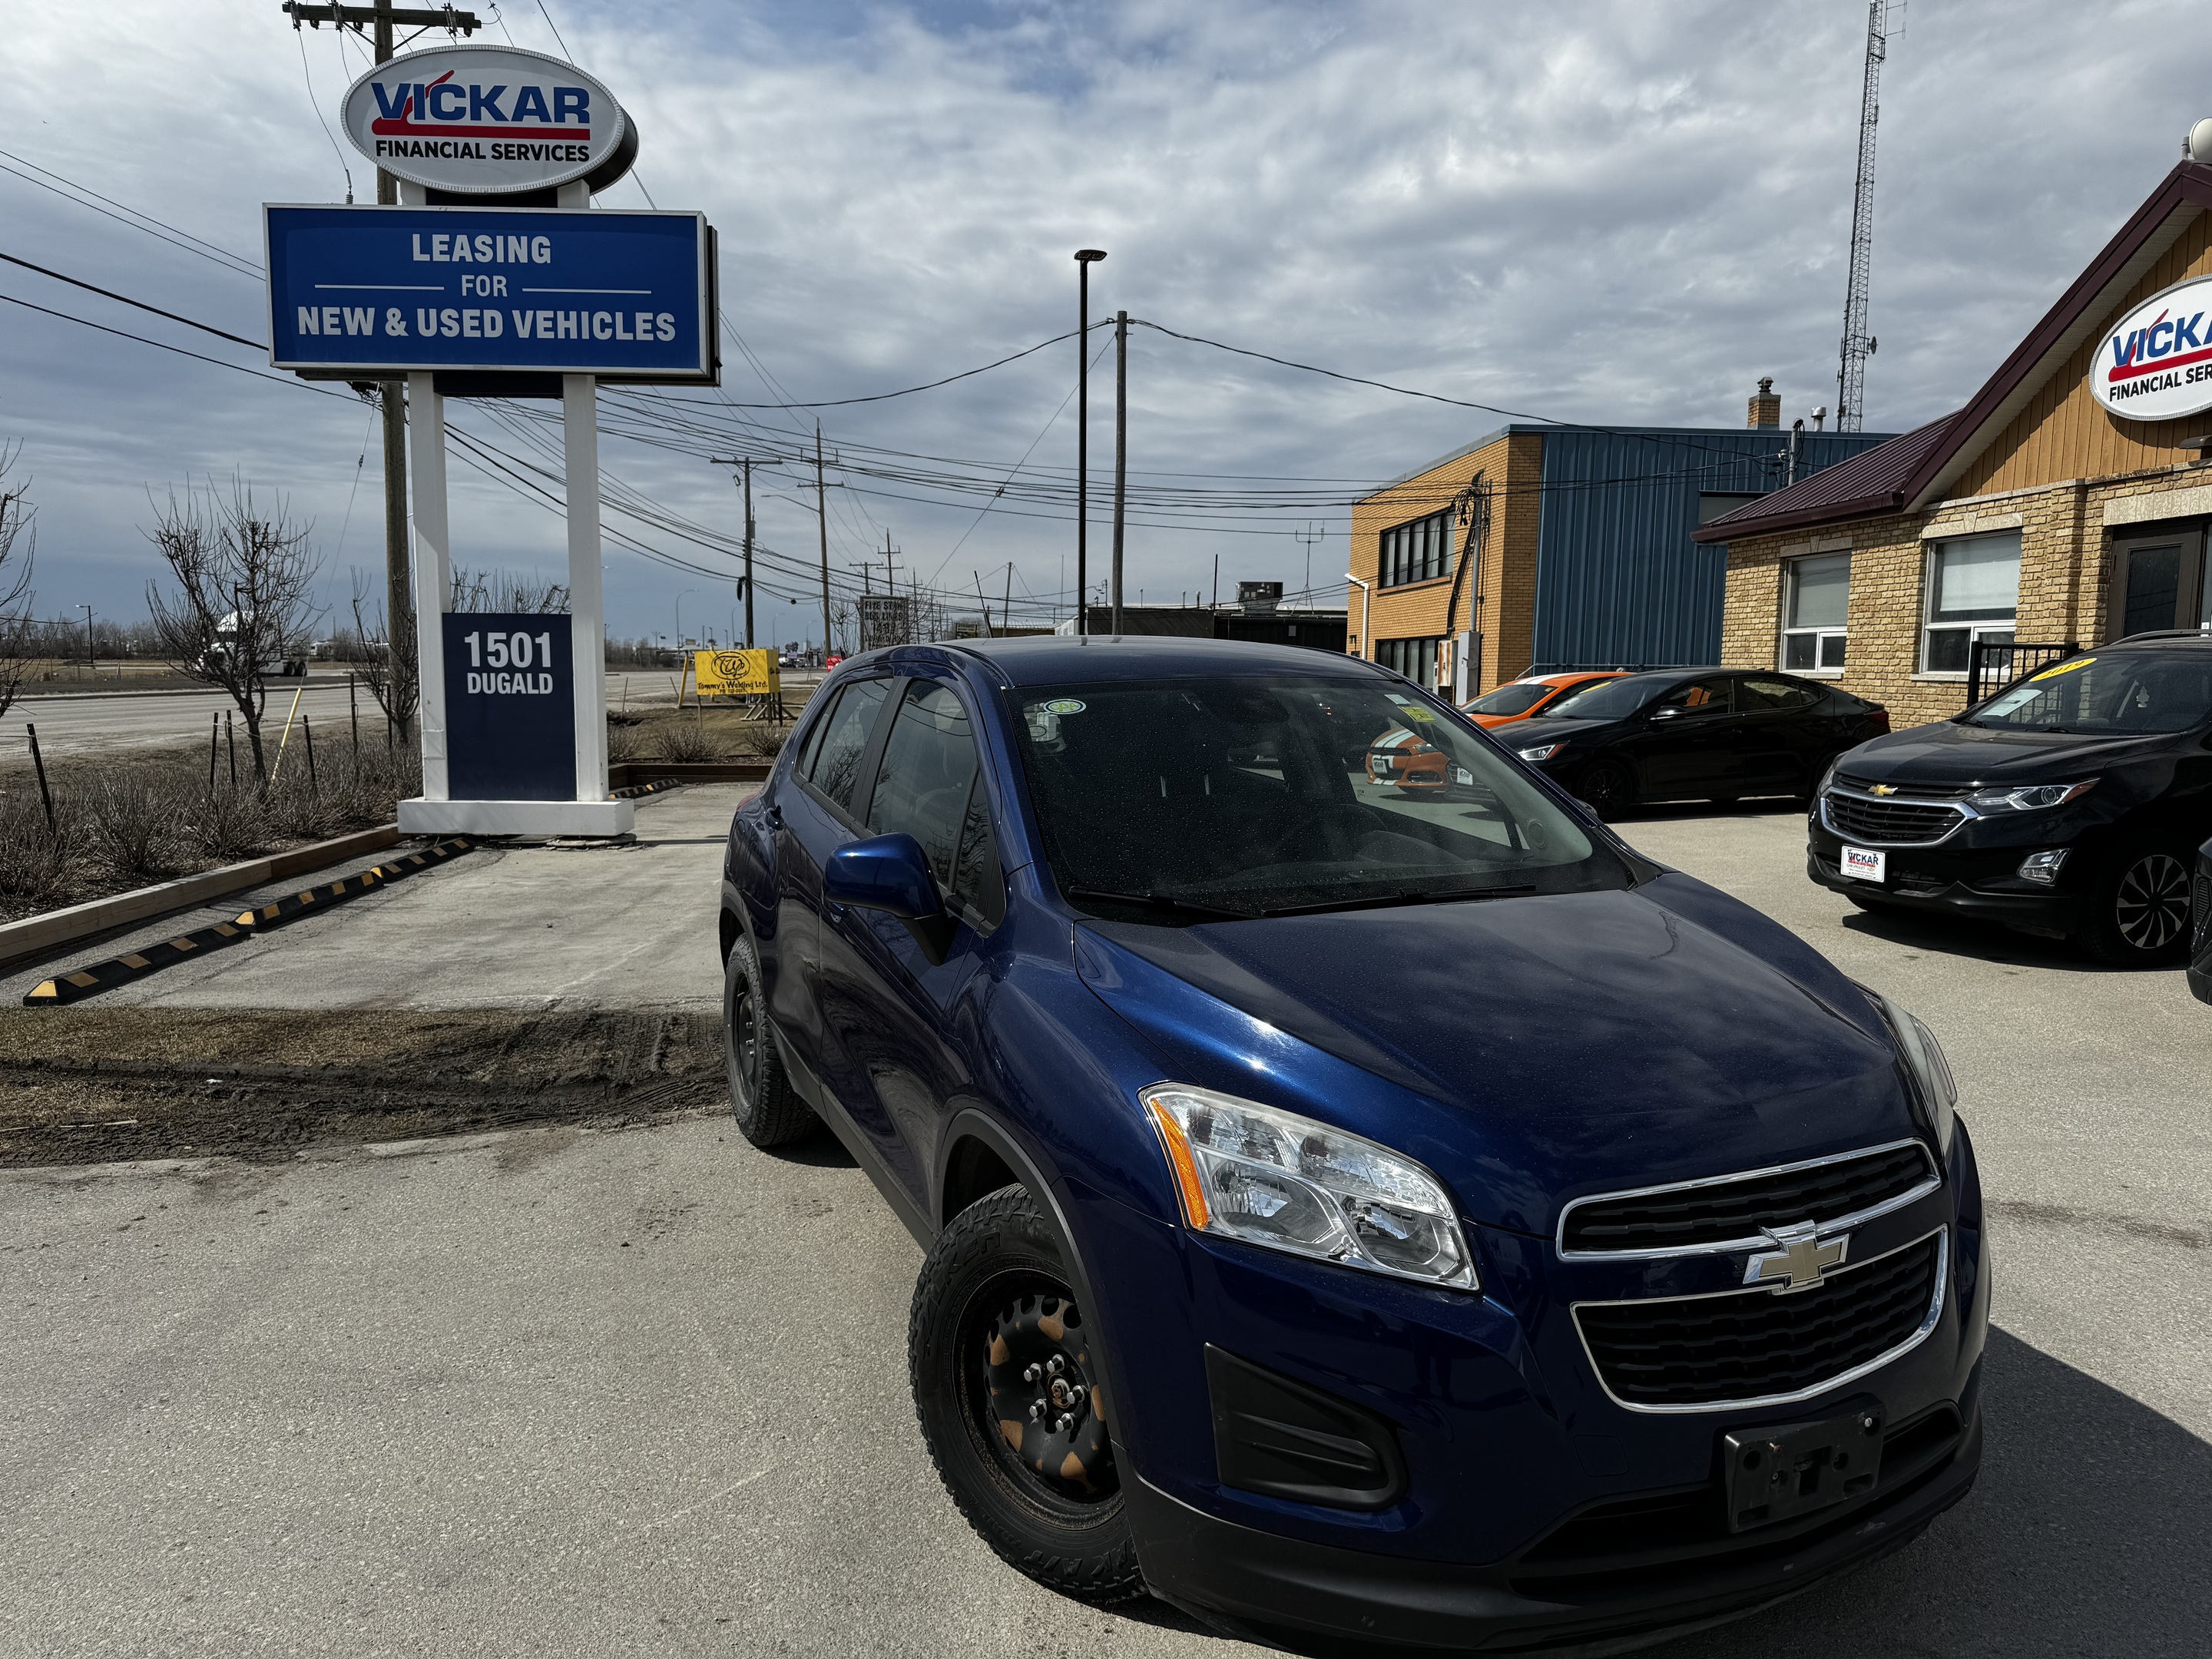 2014 Chevrolet Trax FWD 4dr LS- Remote Start; Very Low KMS!!!